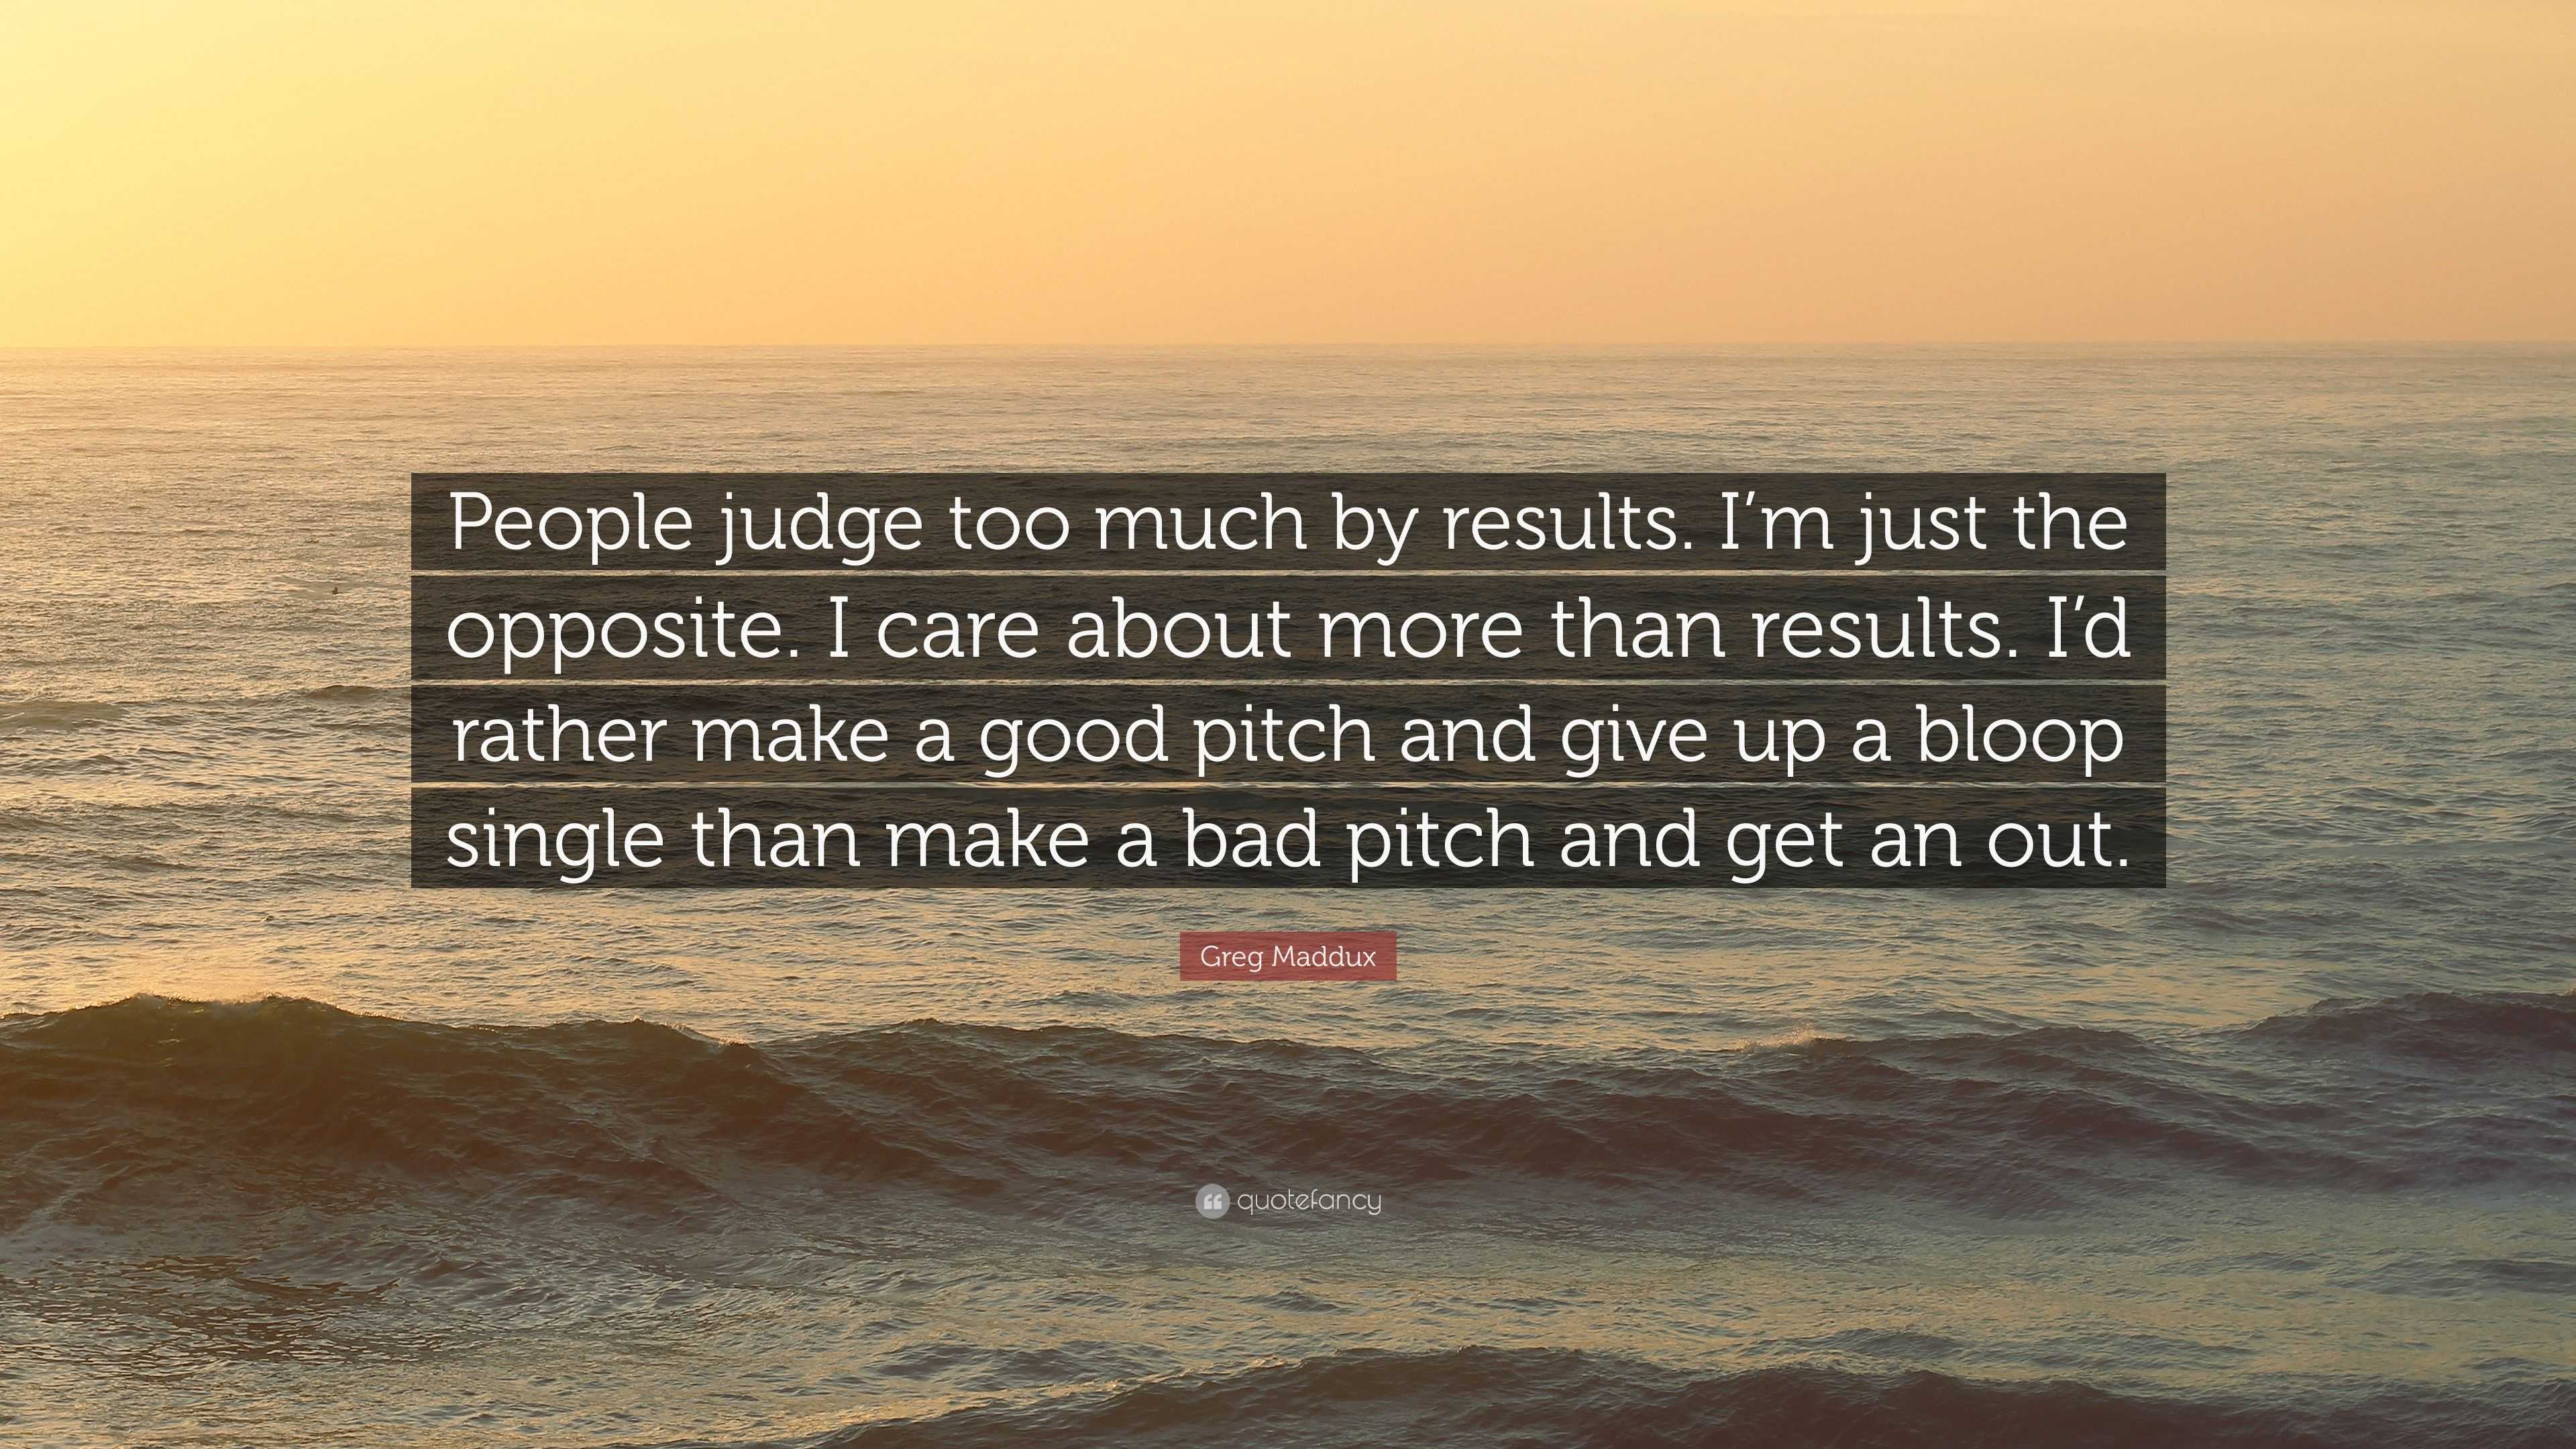 Greg Maddux Quote: “People judge too much by results. I'm just the  opposite. I care about more than results. I'd rather make a good pitch  an”